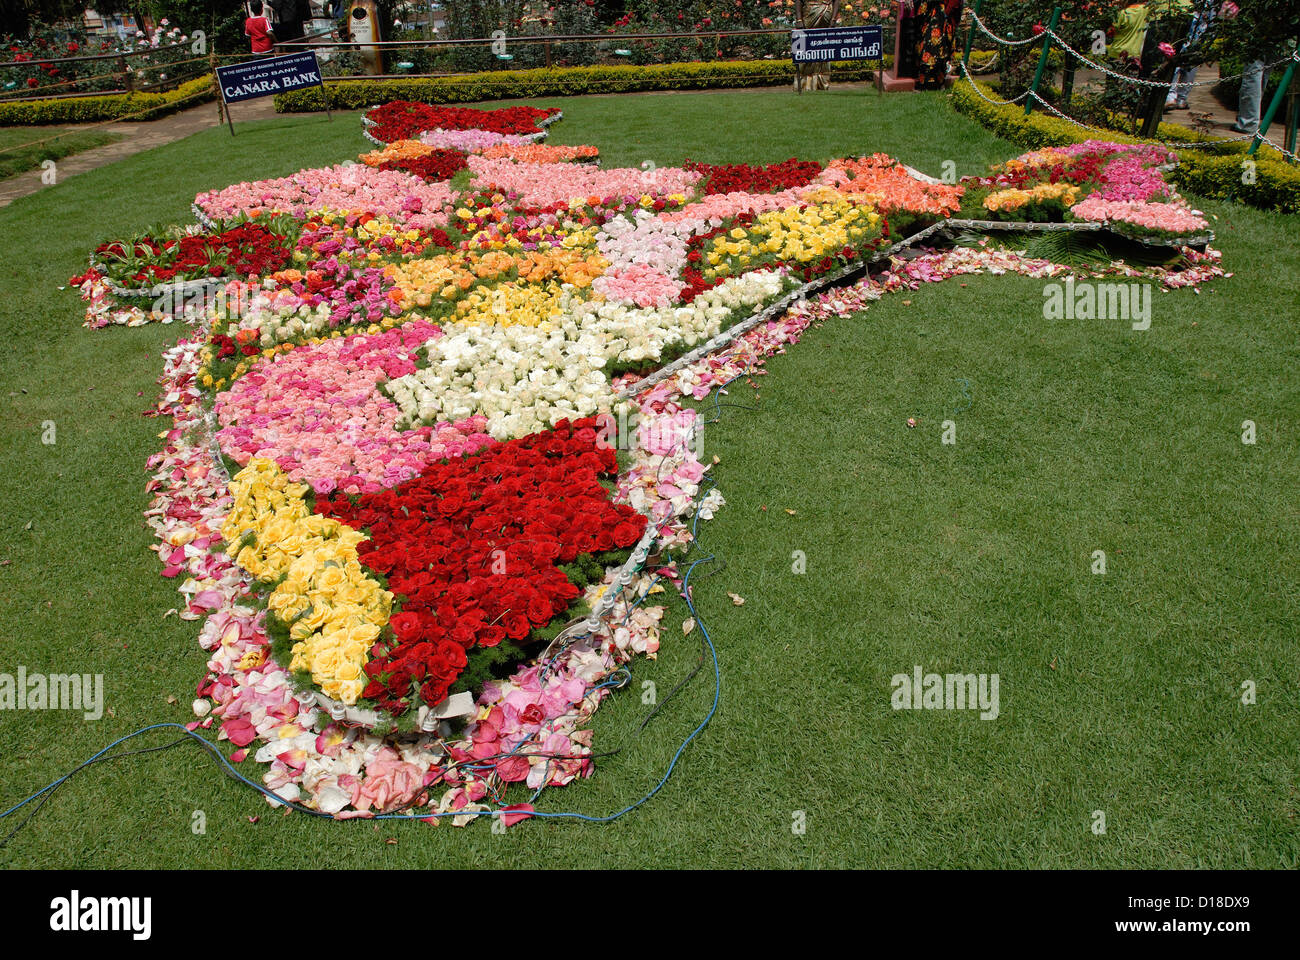 The Beauty of Flower Gardens: Understanding the Tamil Meaning